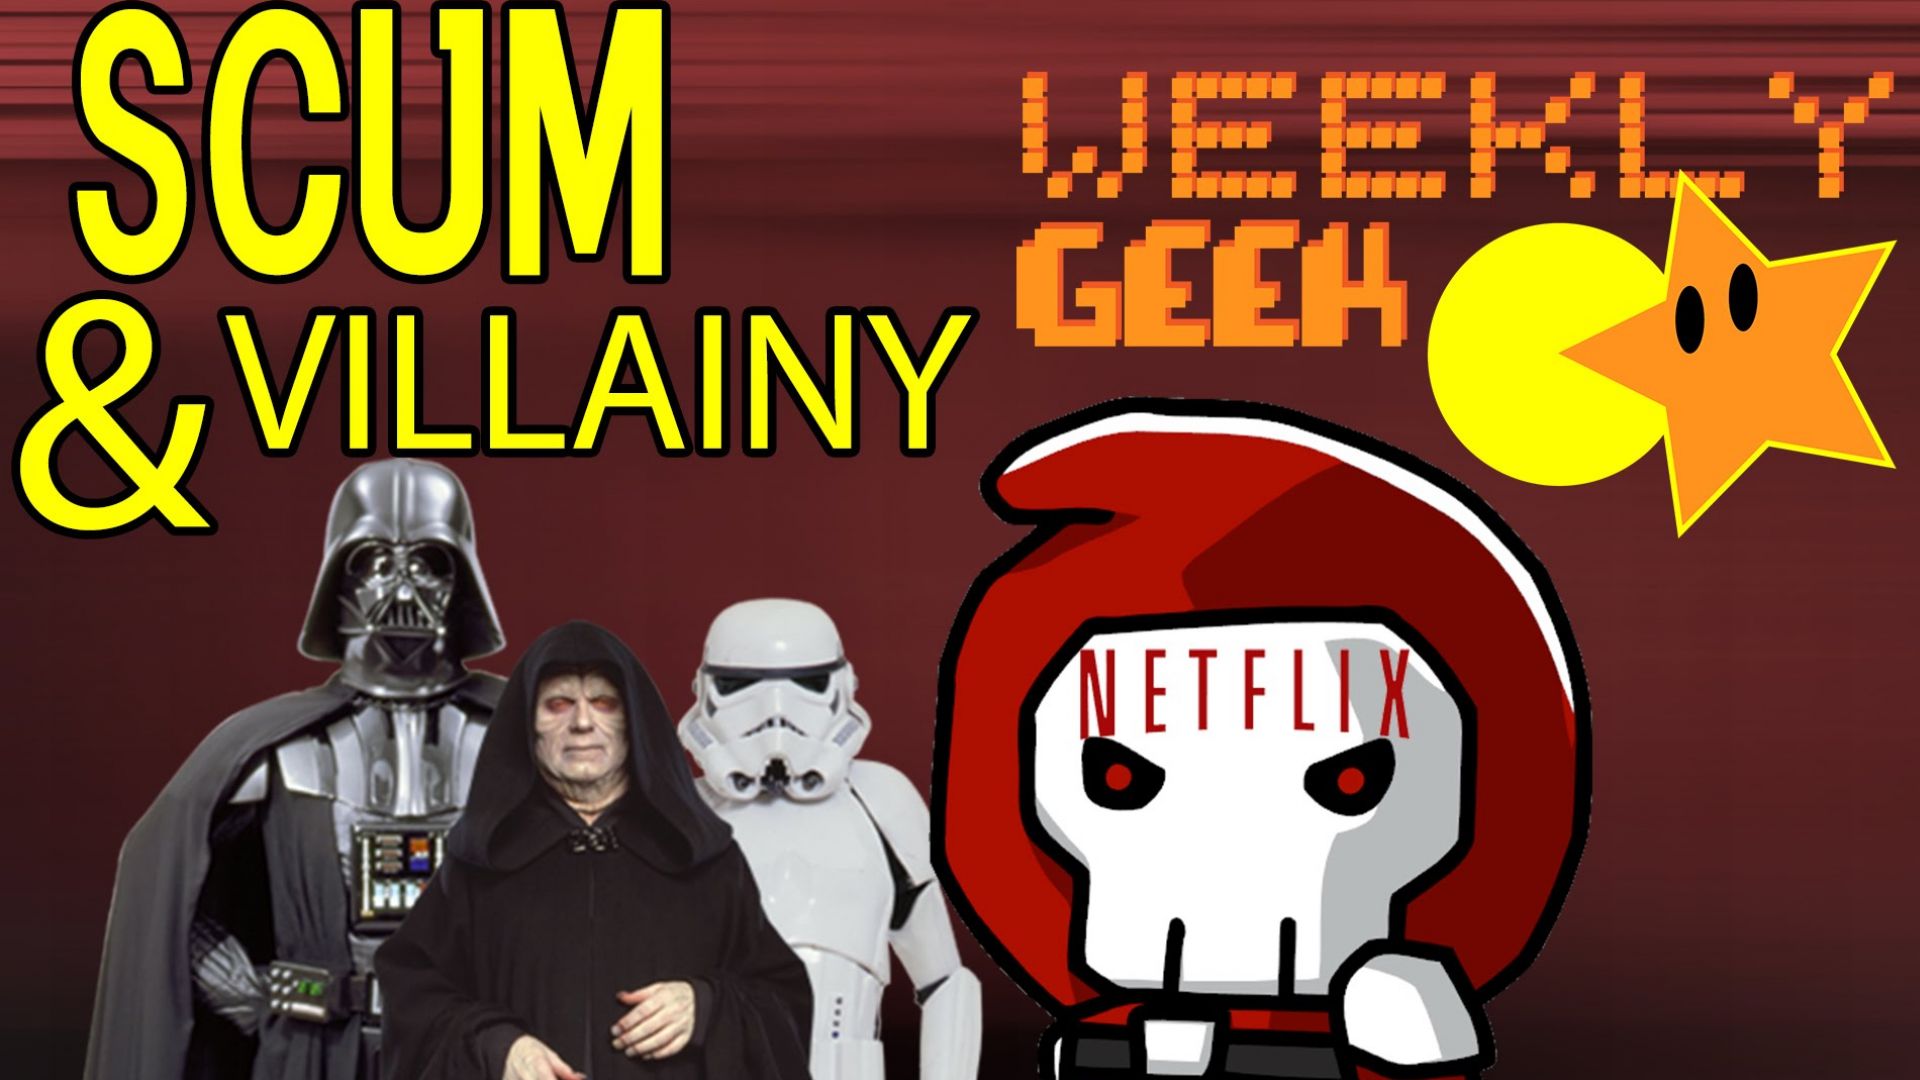 Weekly Geek Cultjer Scum and Villainy